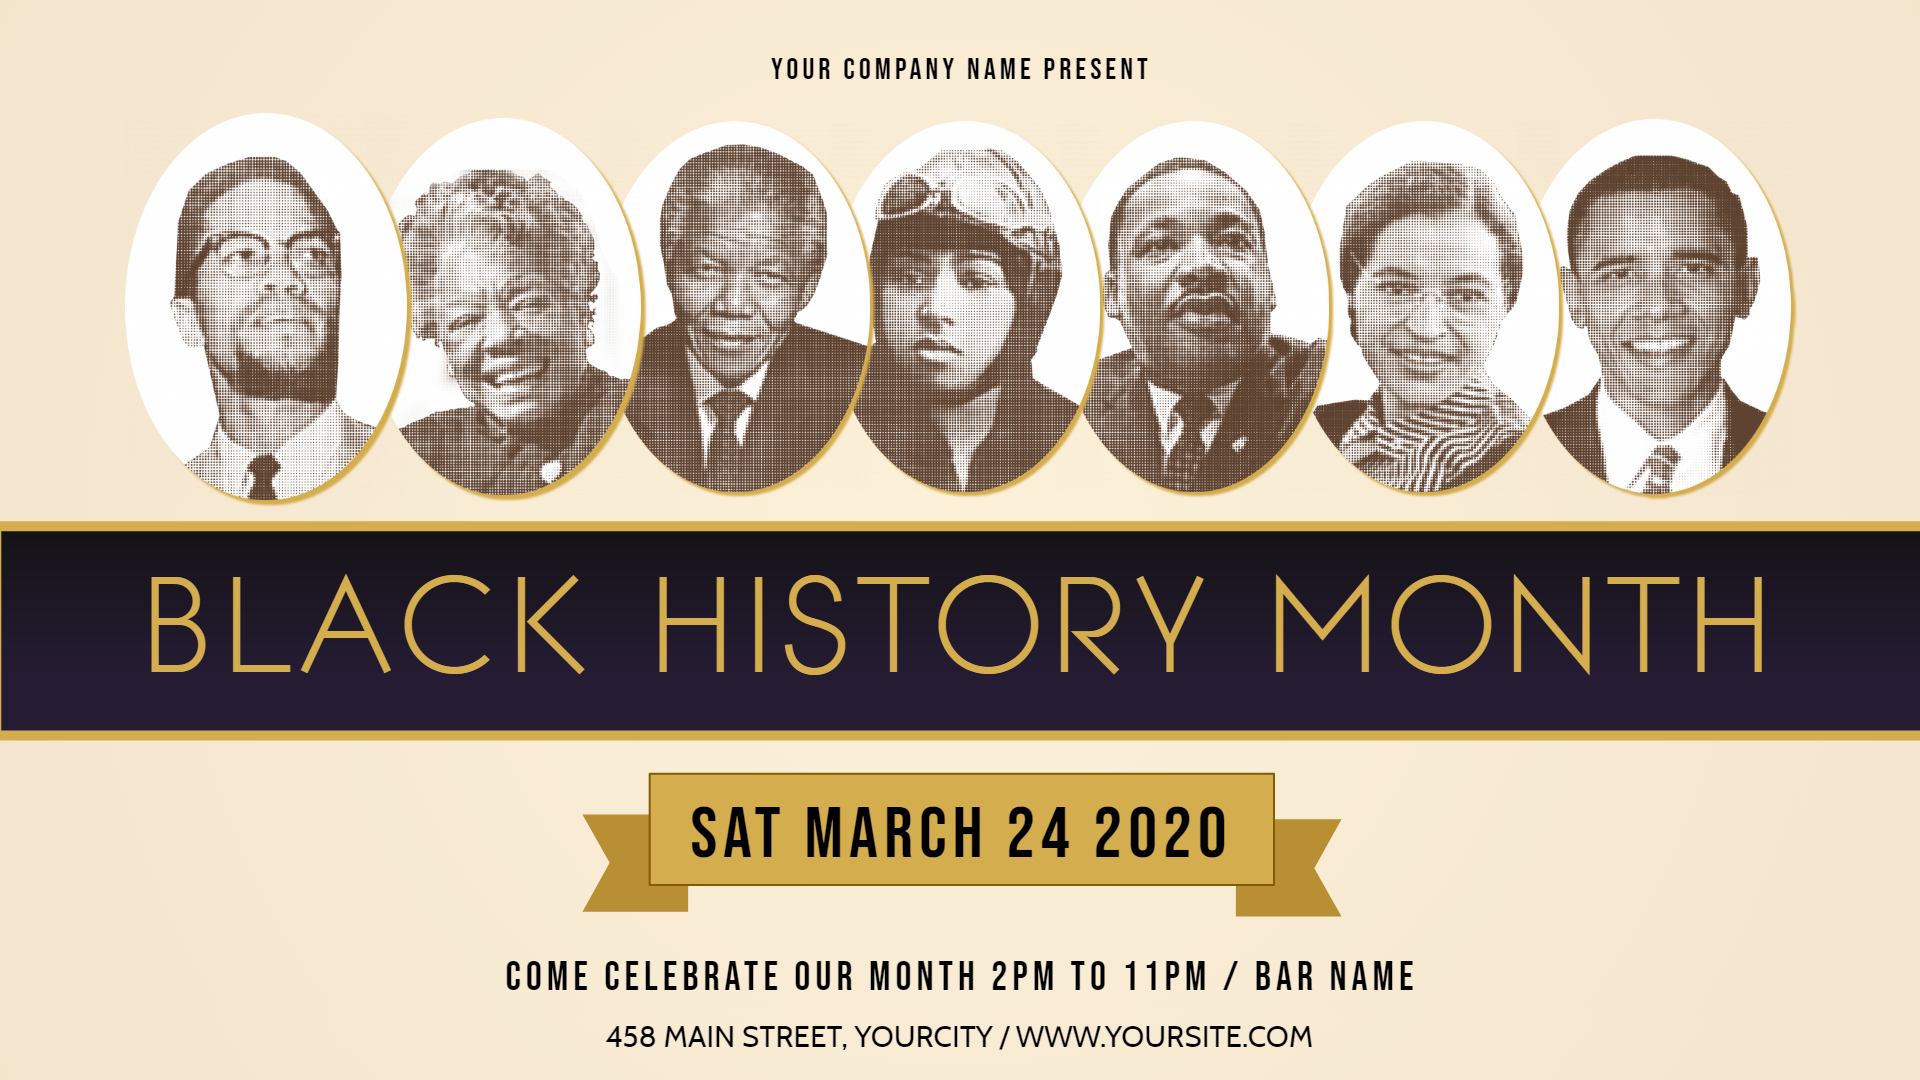 Black History Month Poster Ideas